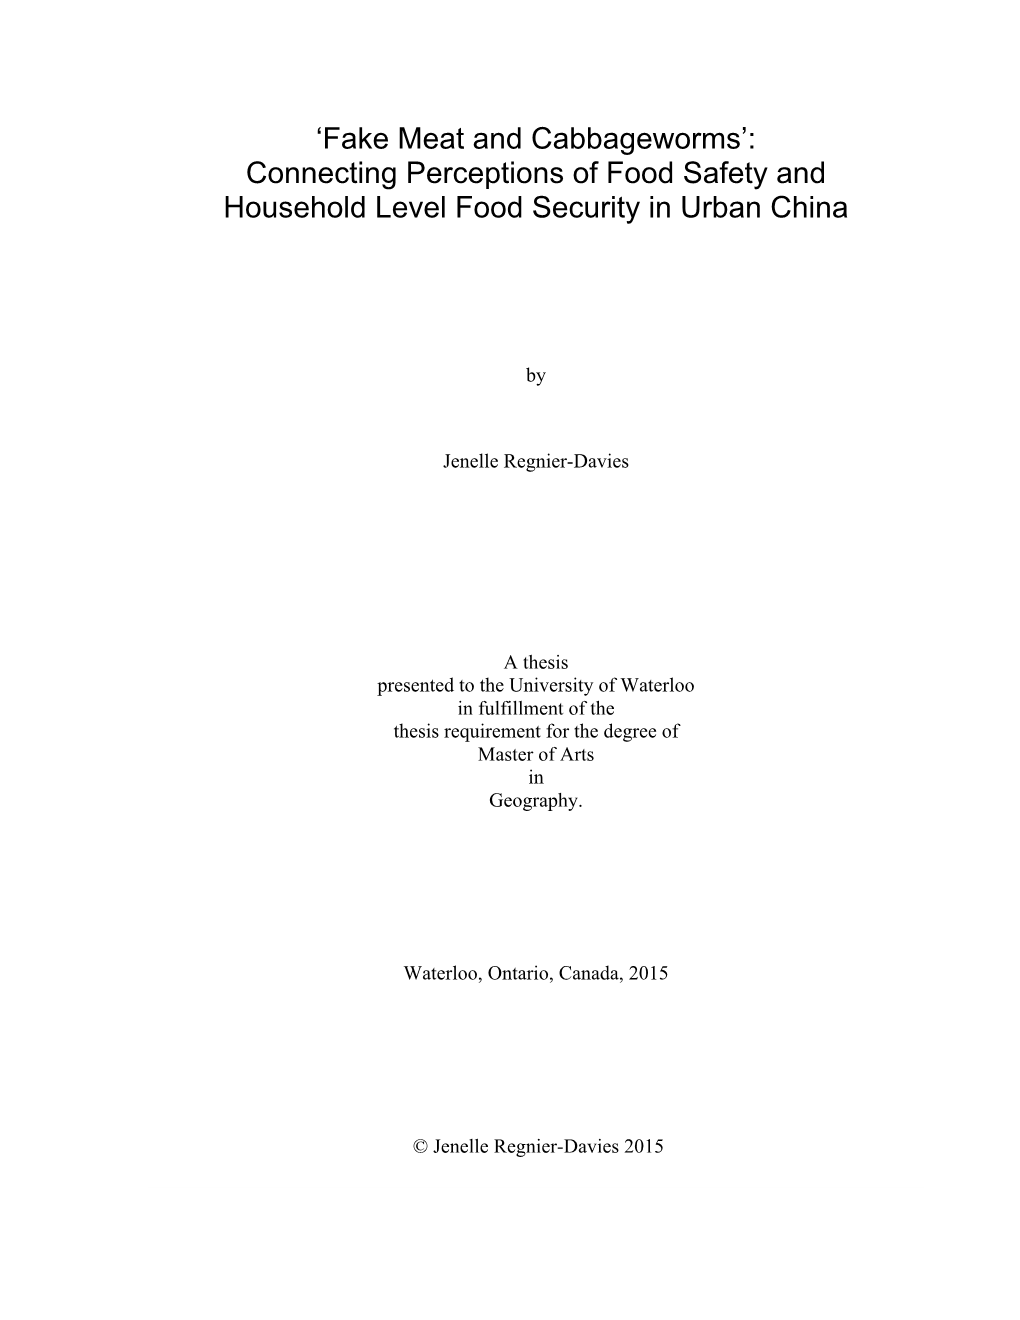 Connecting Perceptions of Food Safety and Household Level Food Security in Urban China